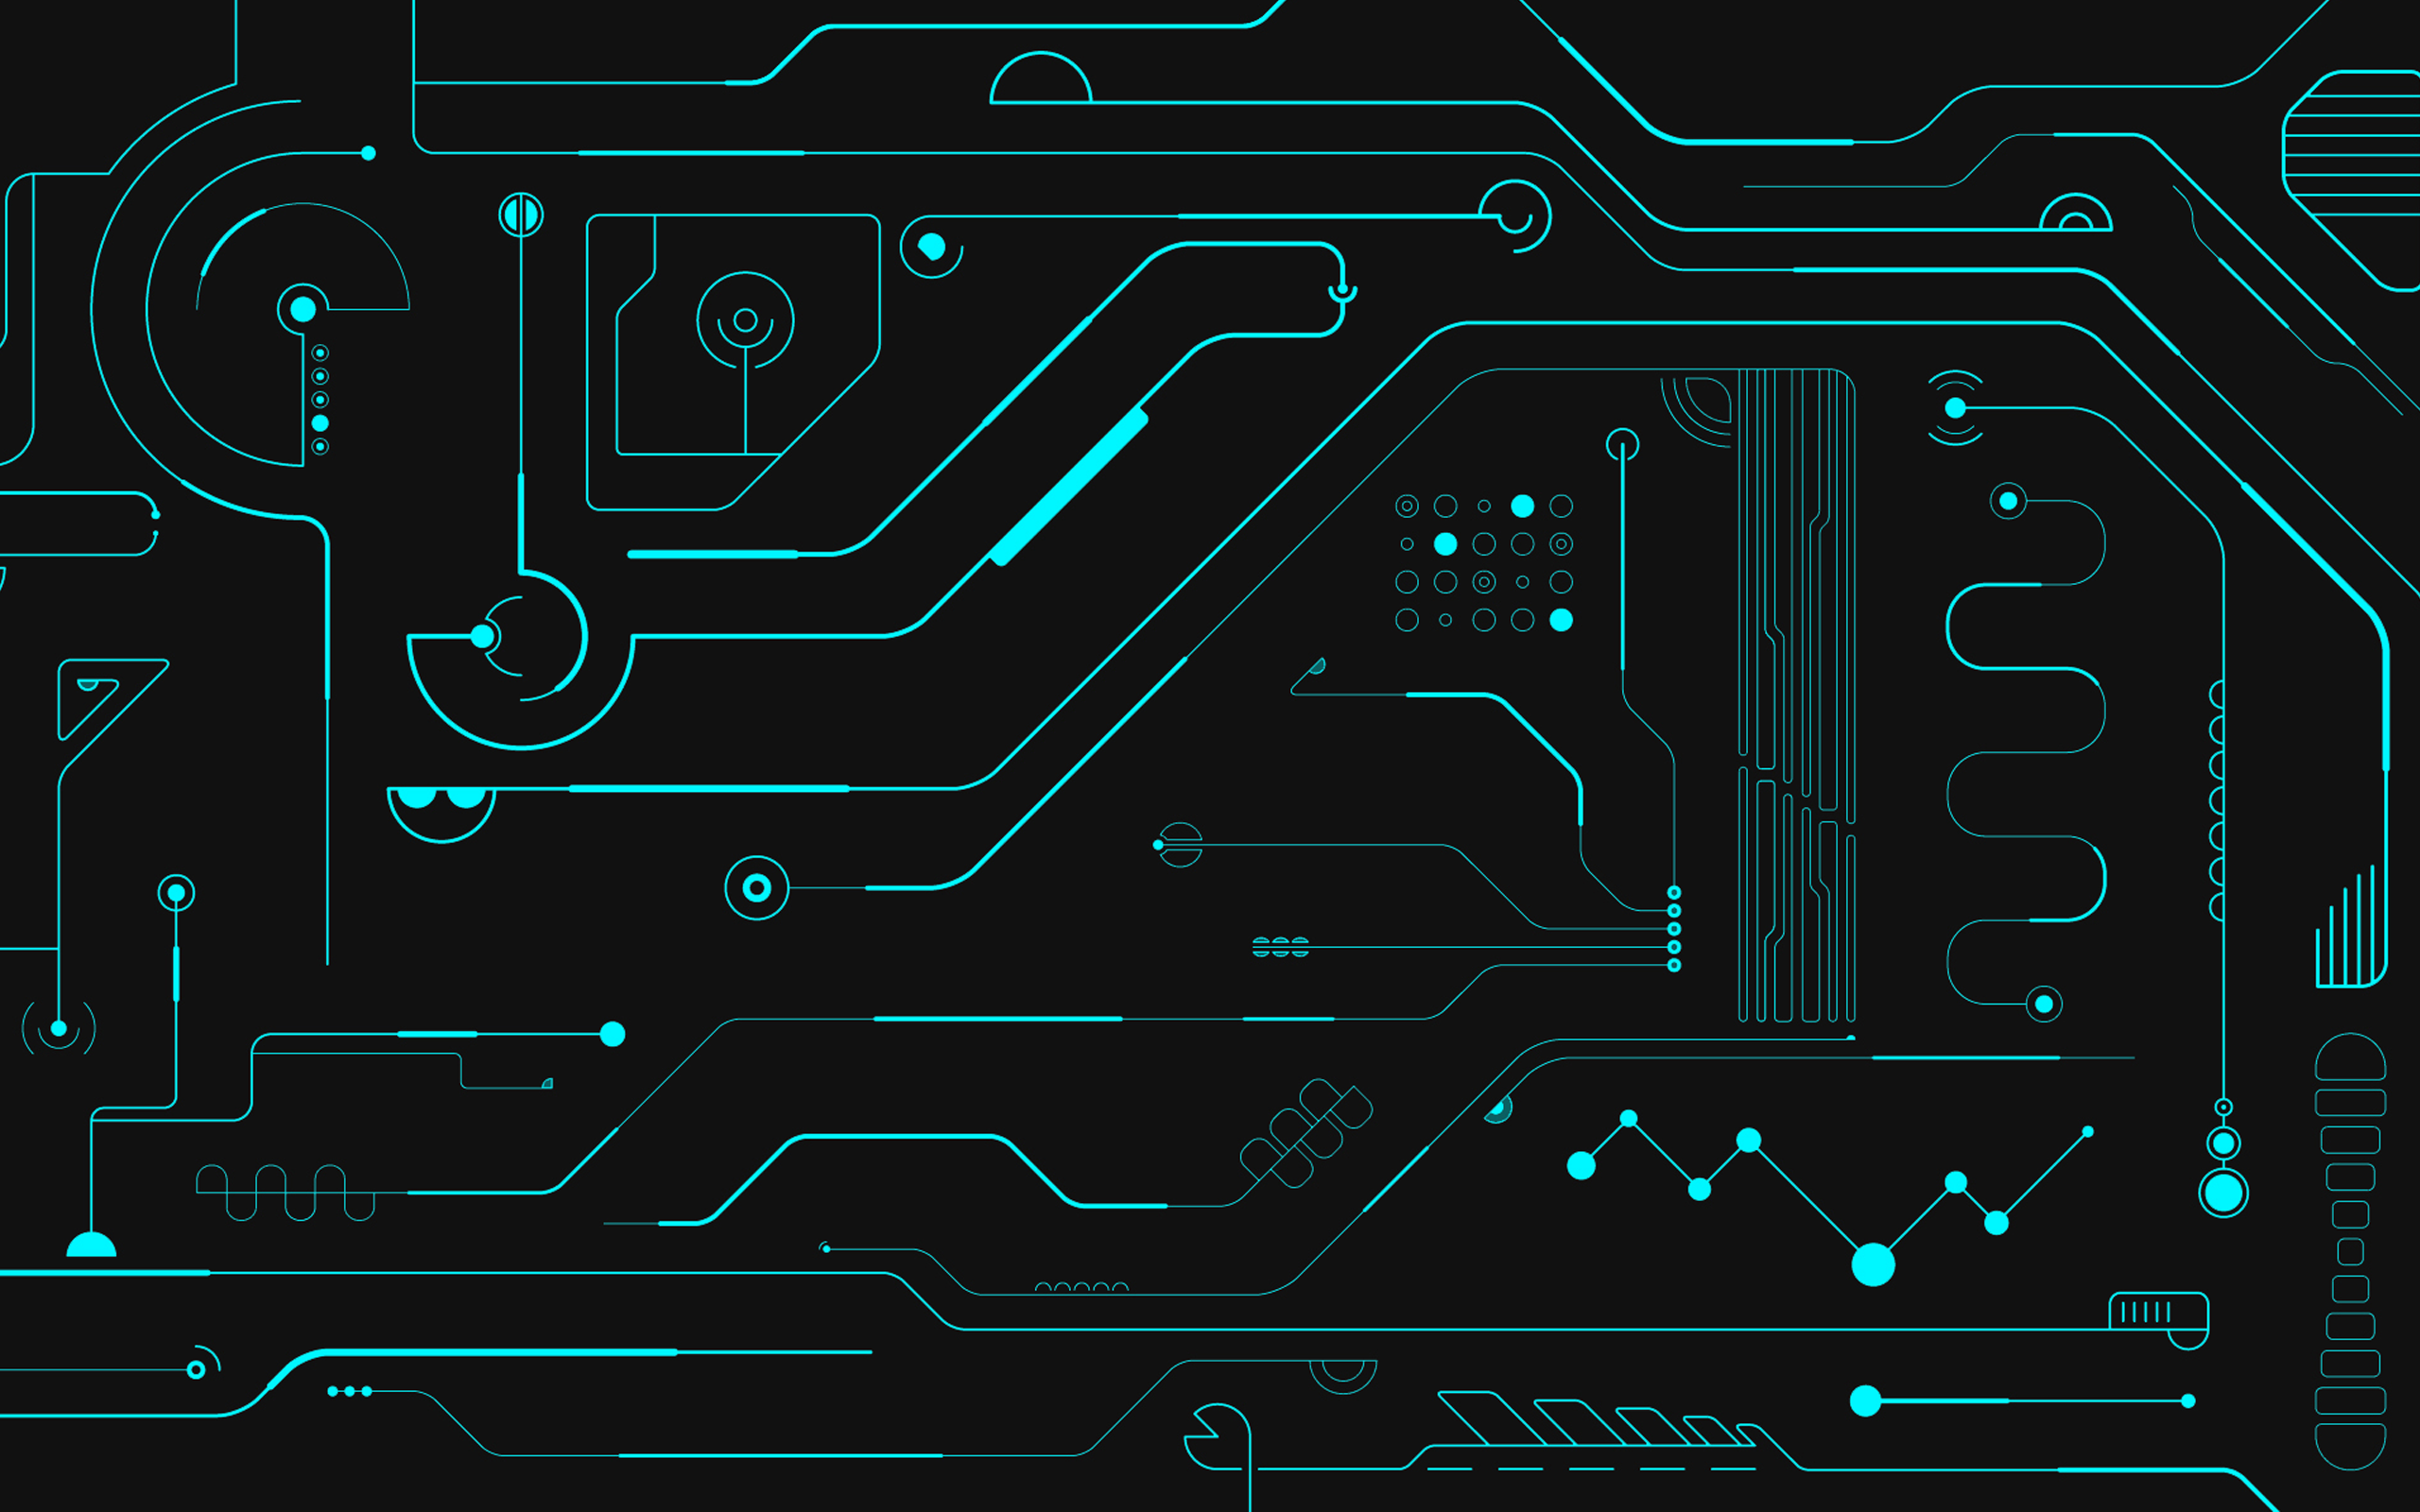 Circuits Wallpaper. Back to the Future Time Circuits Wallpaper, Circuits Simulation Wallpaper and Circuits Wallpaper